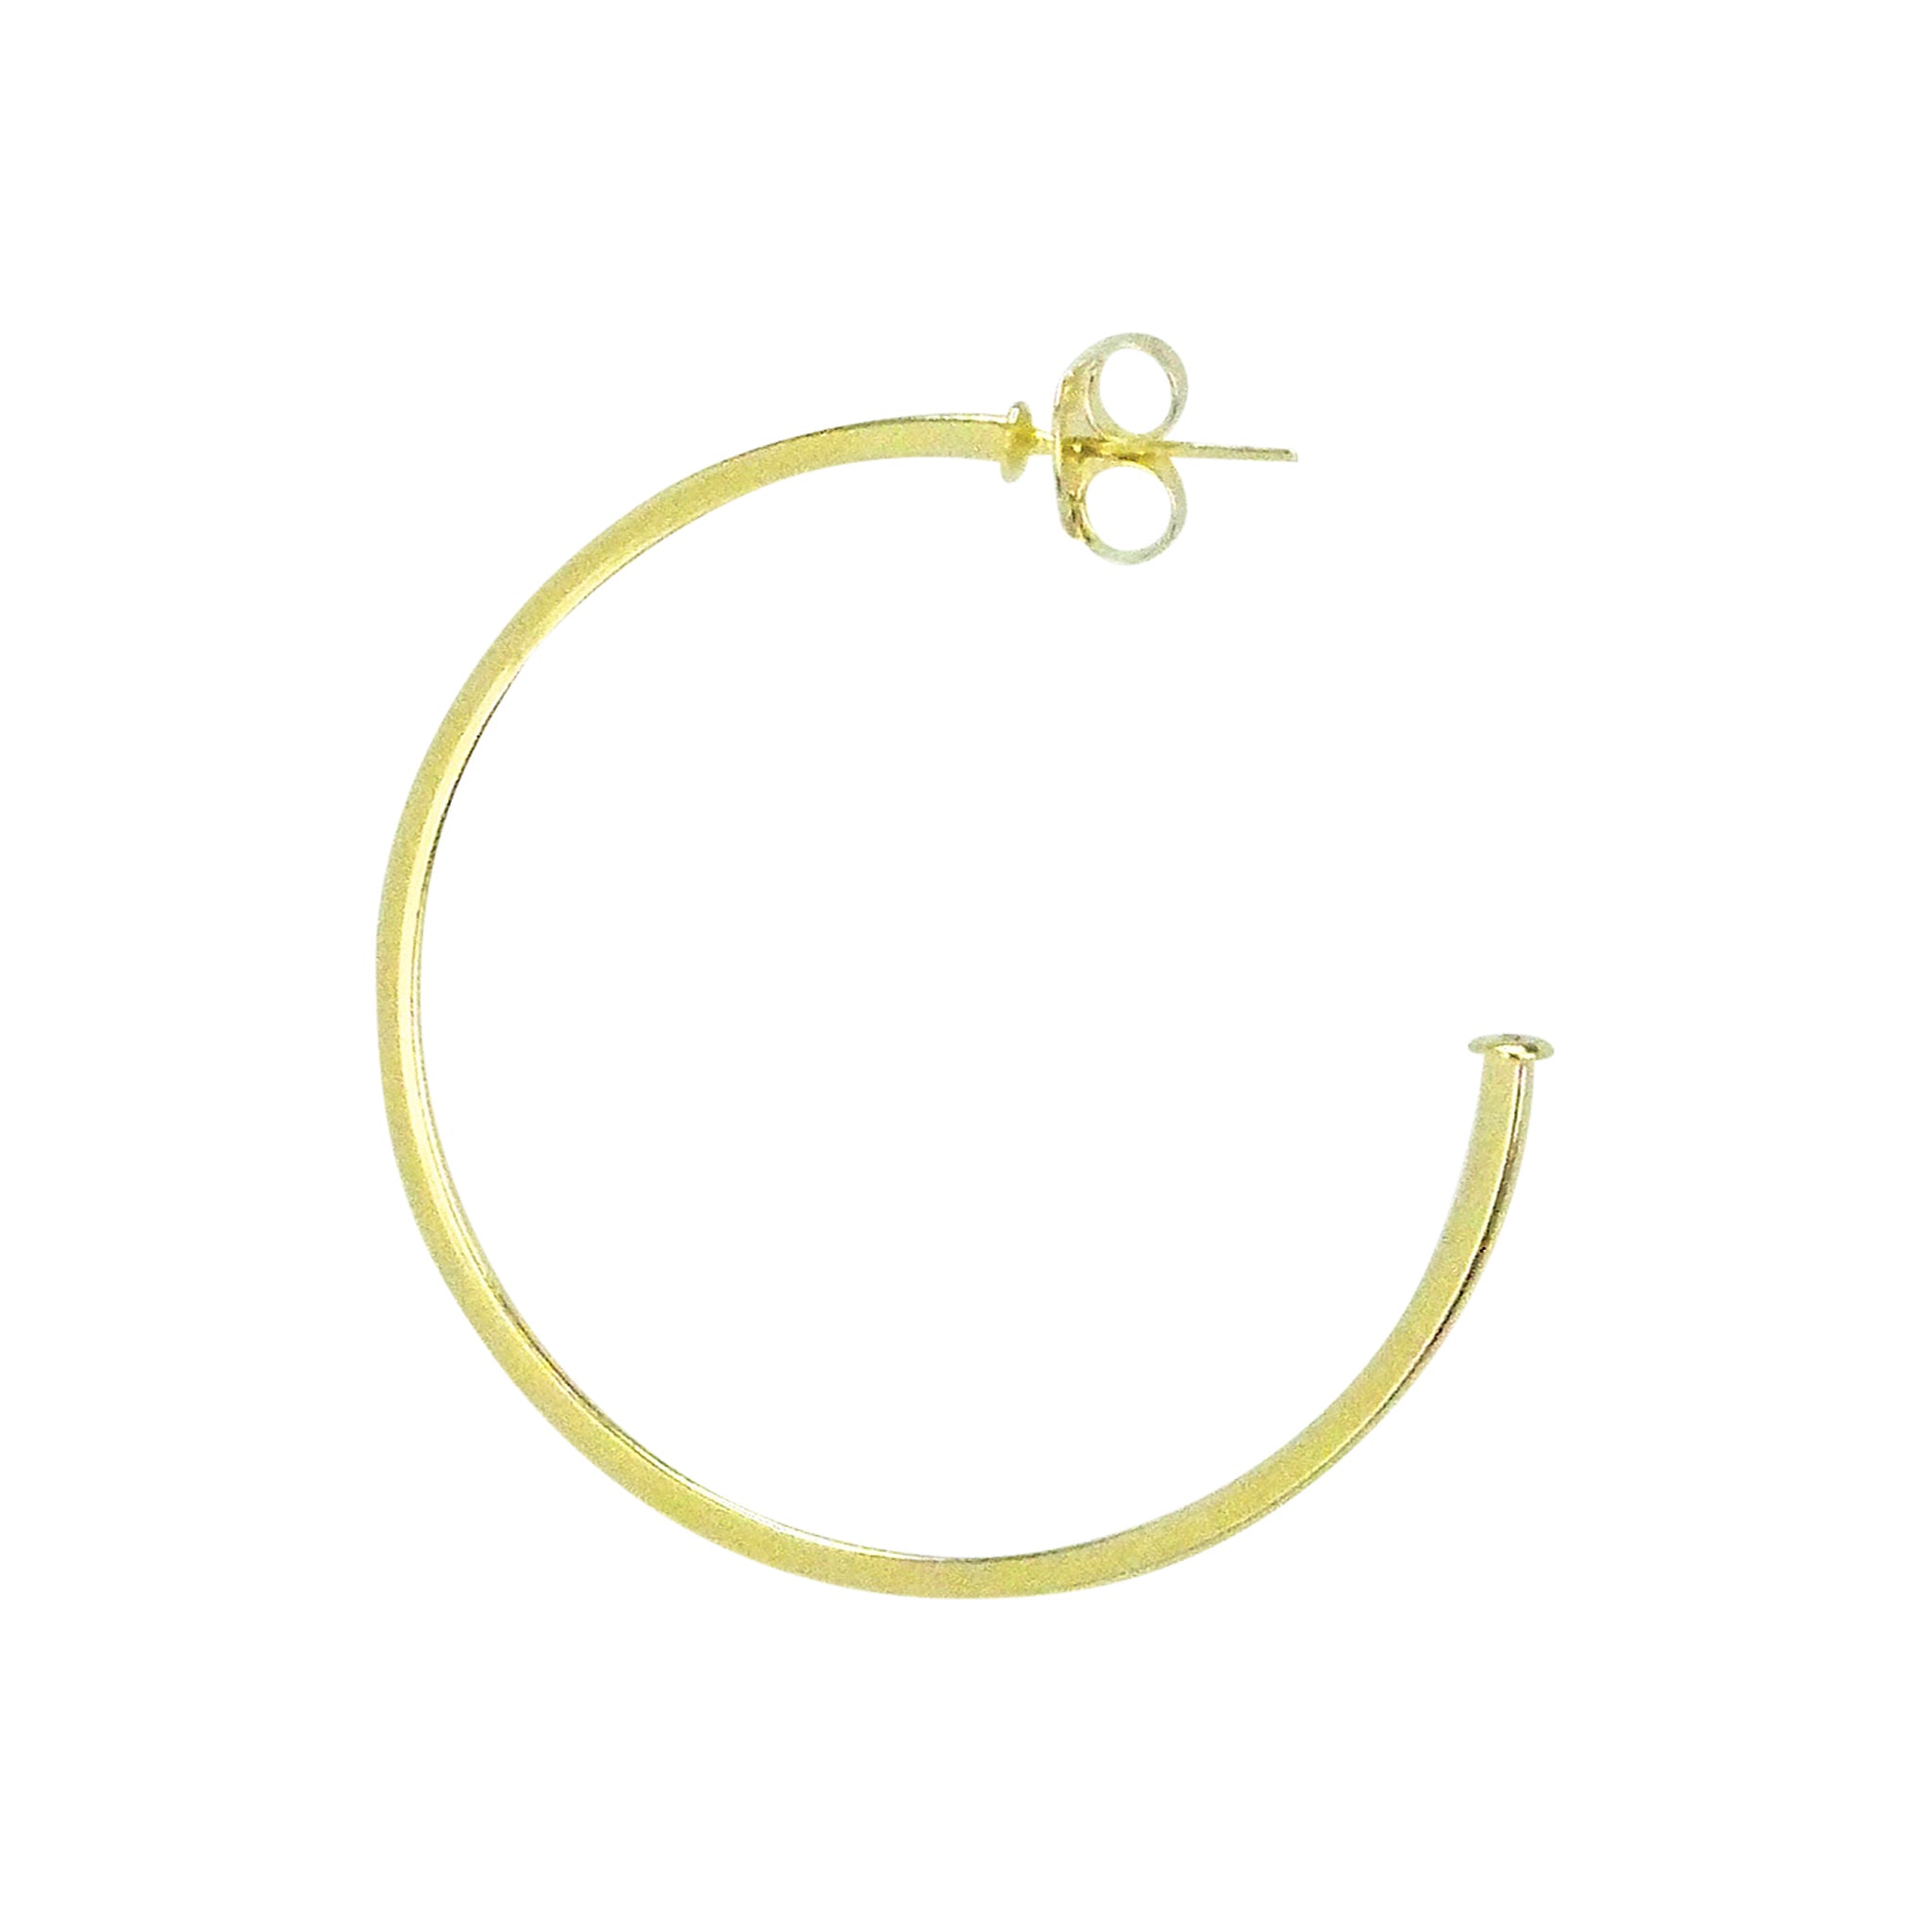 Sheila Fajl Perfect Square Tube Hoop Earrings in Gold Plated